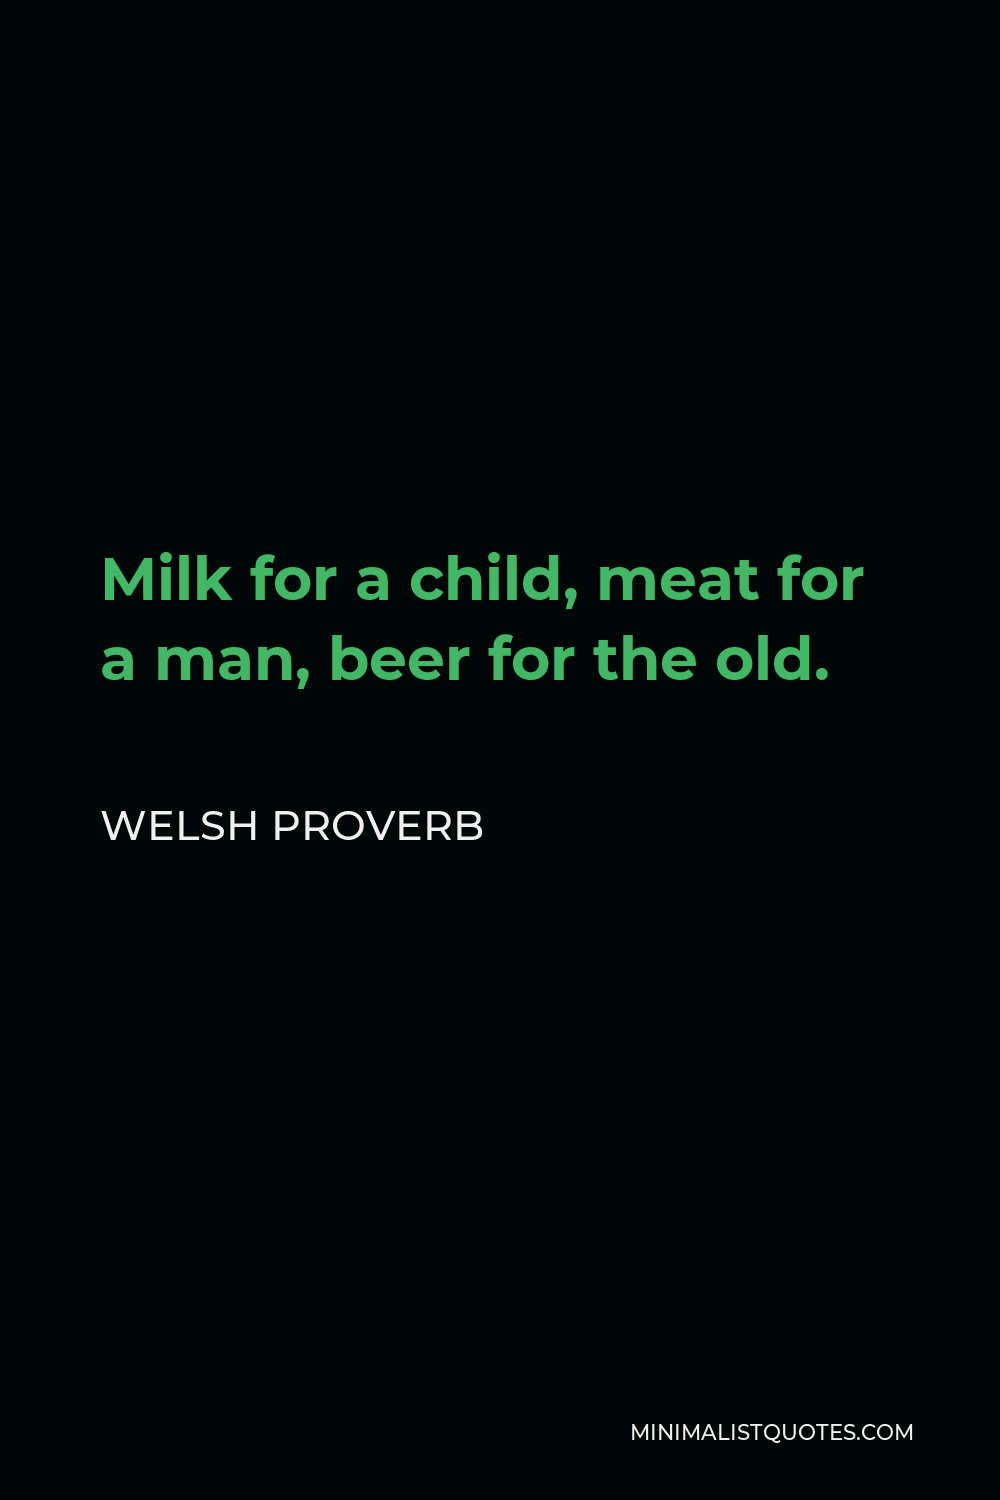 Welsh Proverb Quote - Milk for a child, meat for a man, beer for the old.